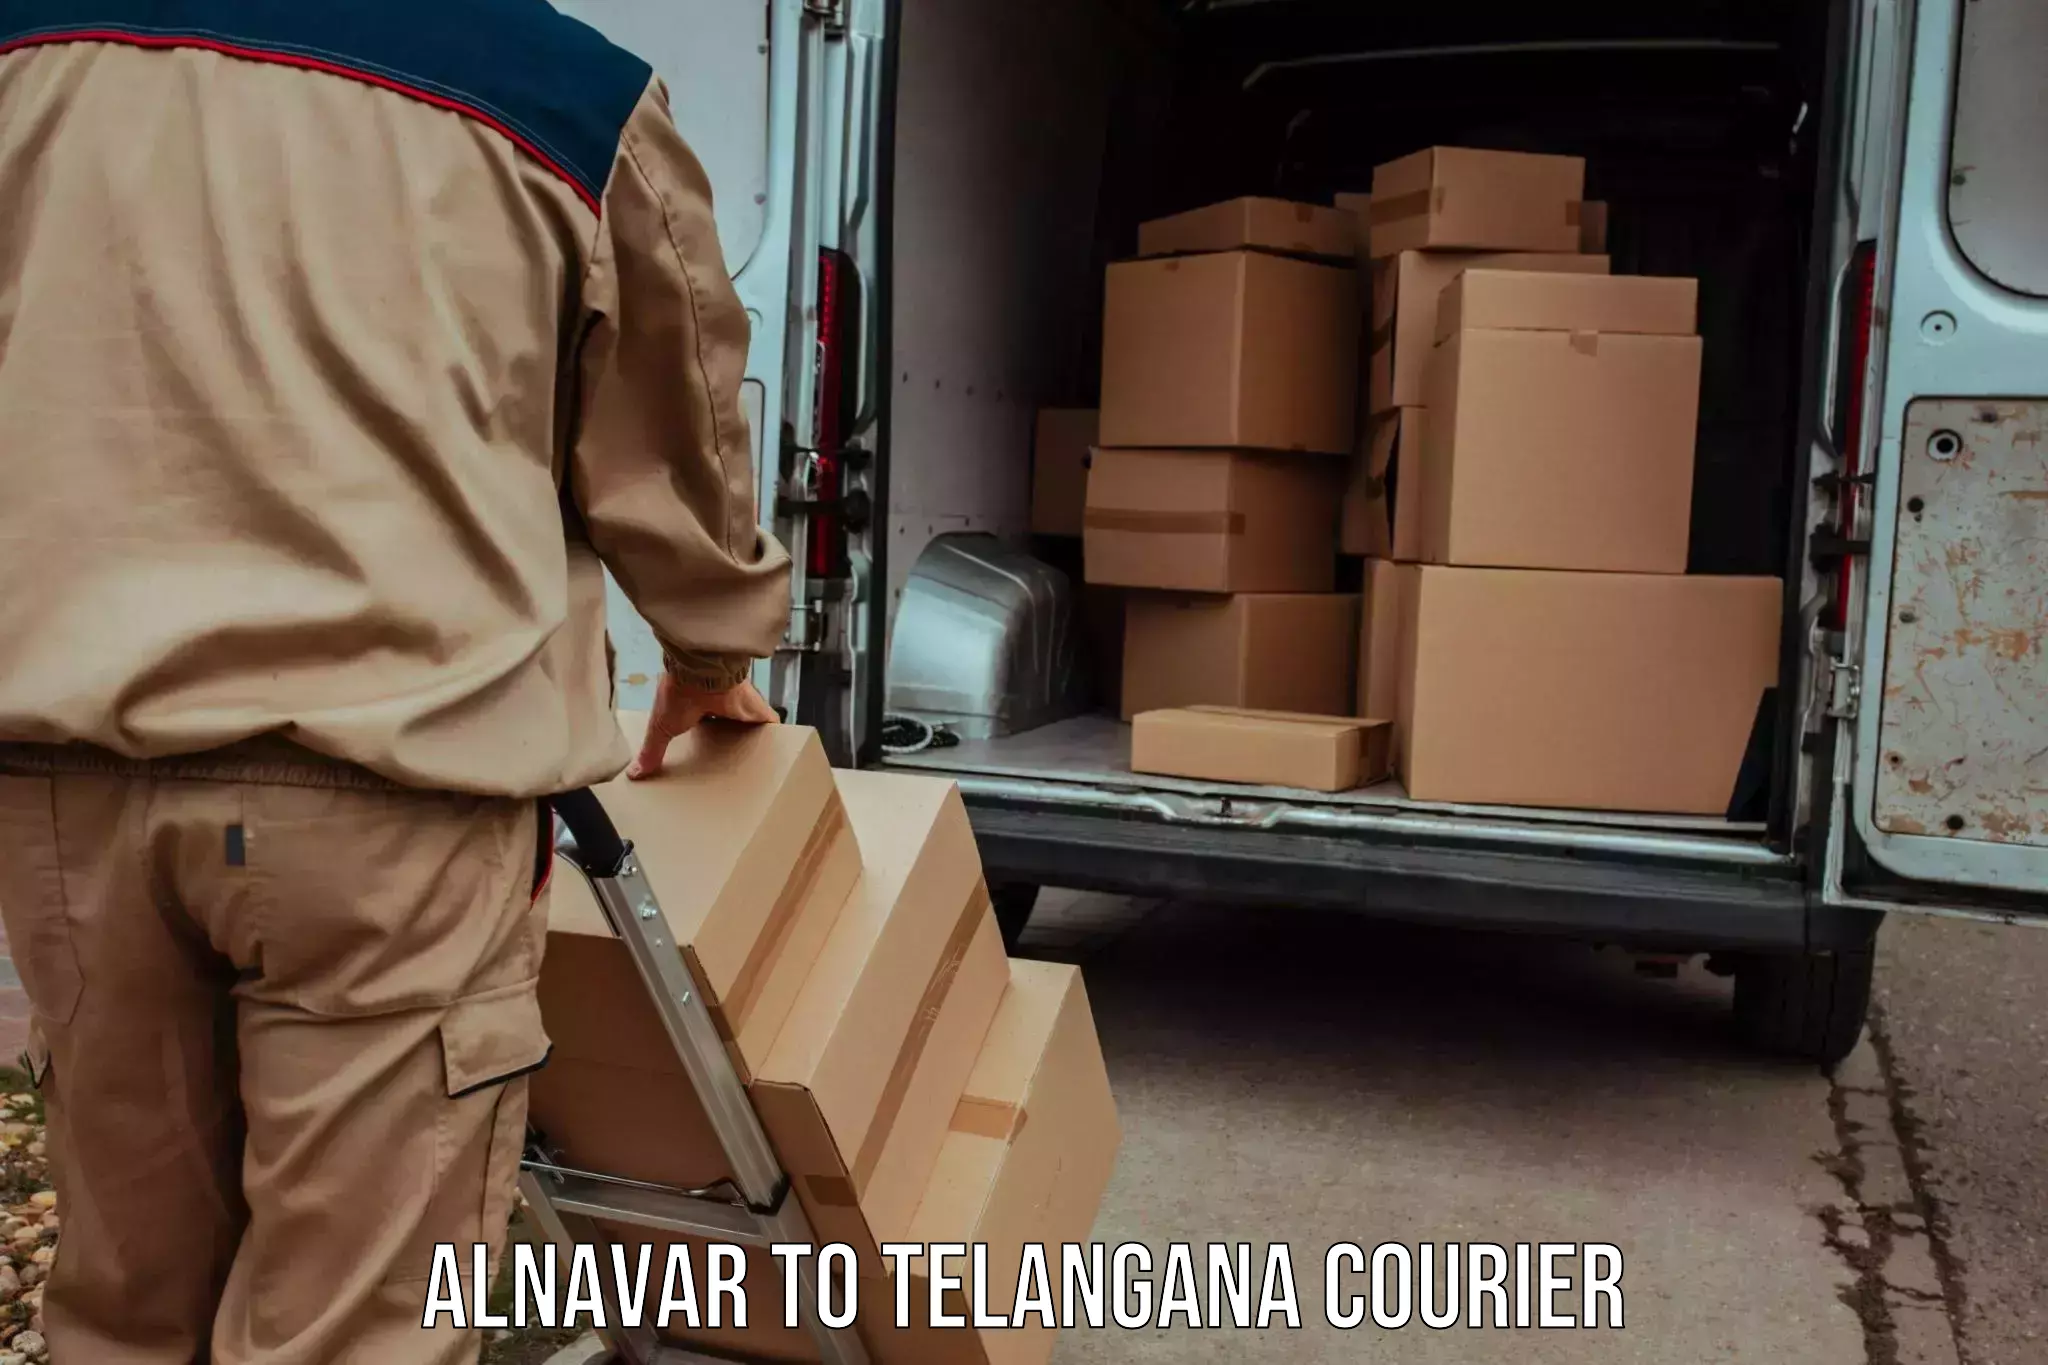 Courier service efficiency Alnavar to Sultanabad